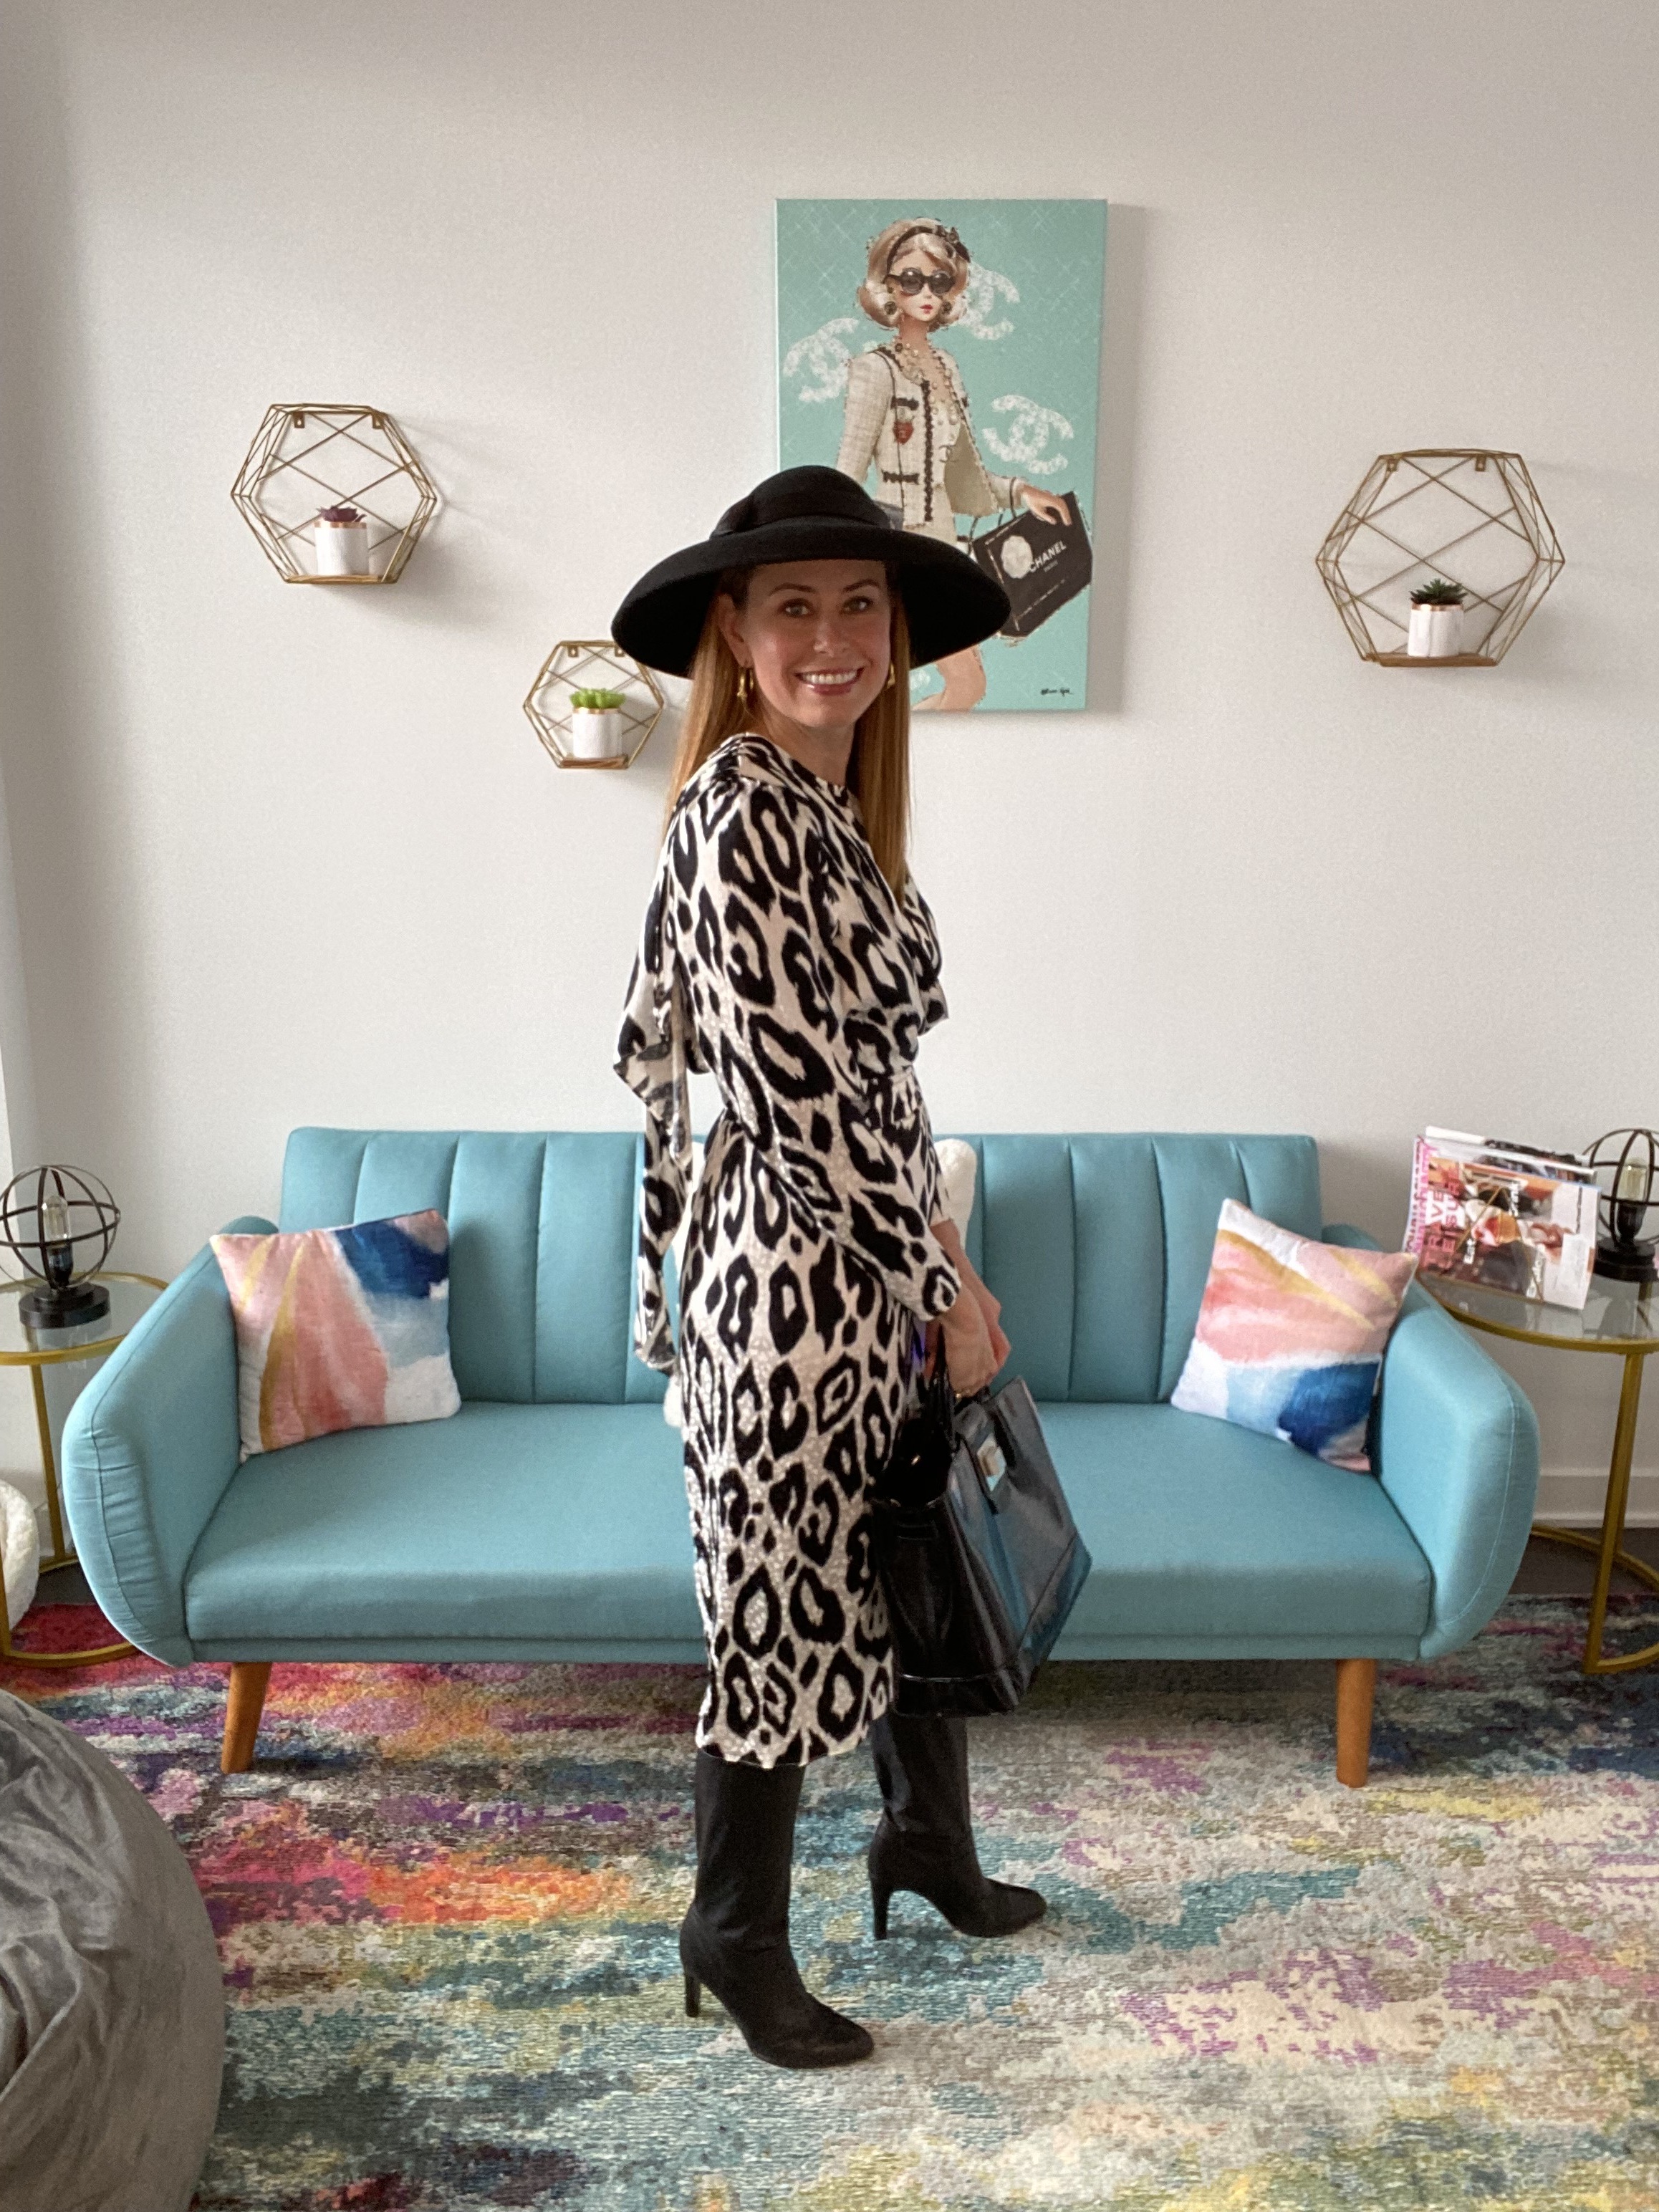 Woman in black and white zebra-printed dress with boots and hat